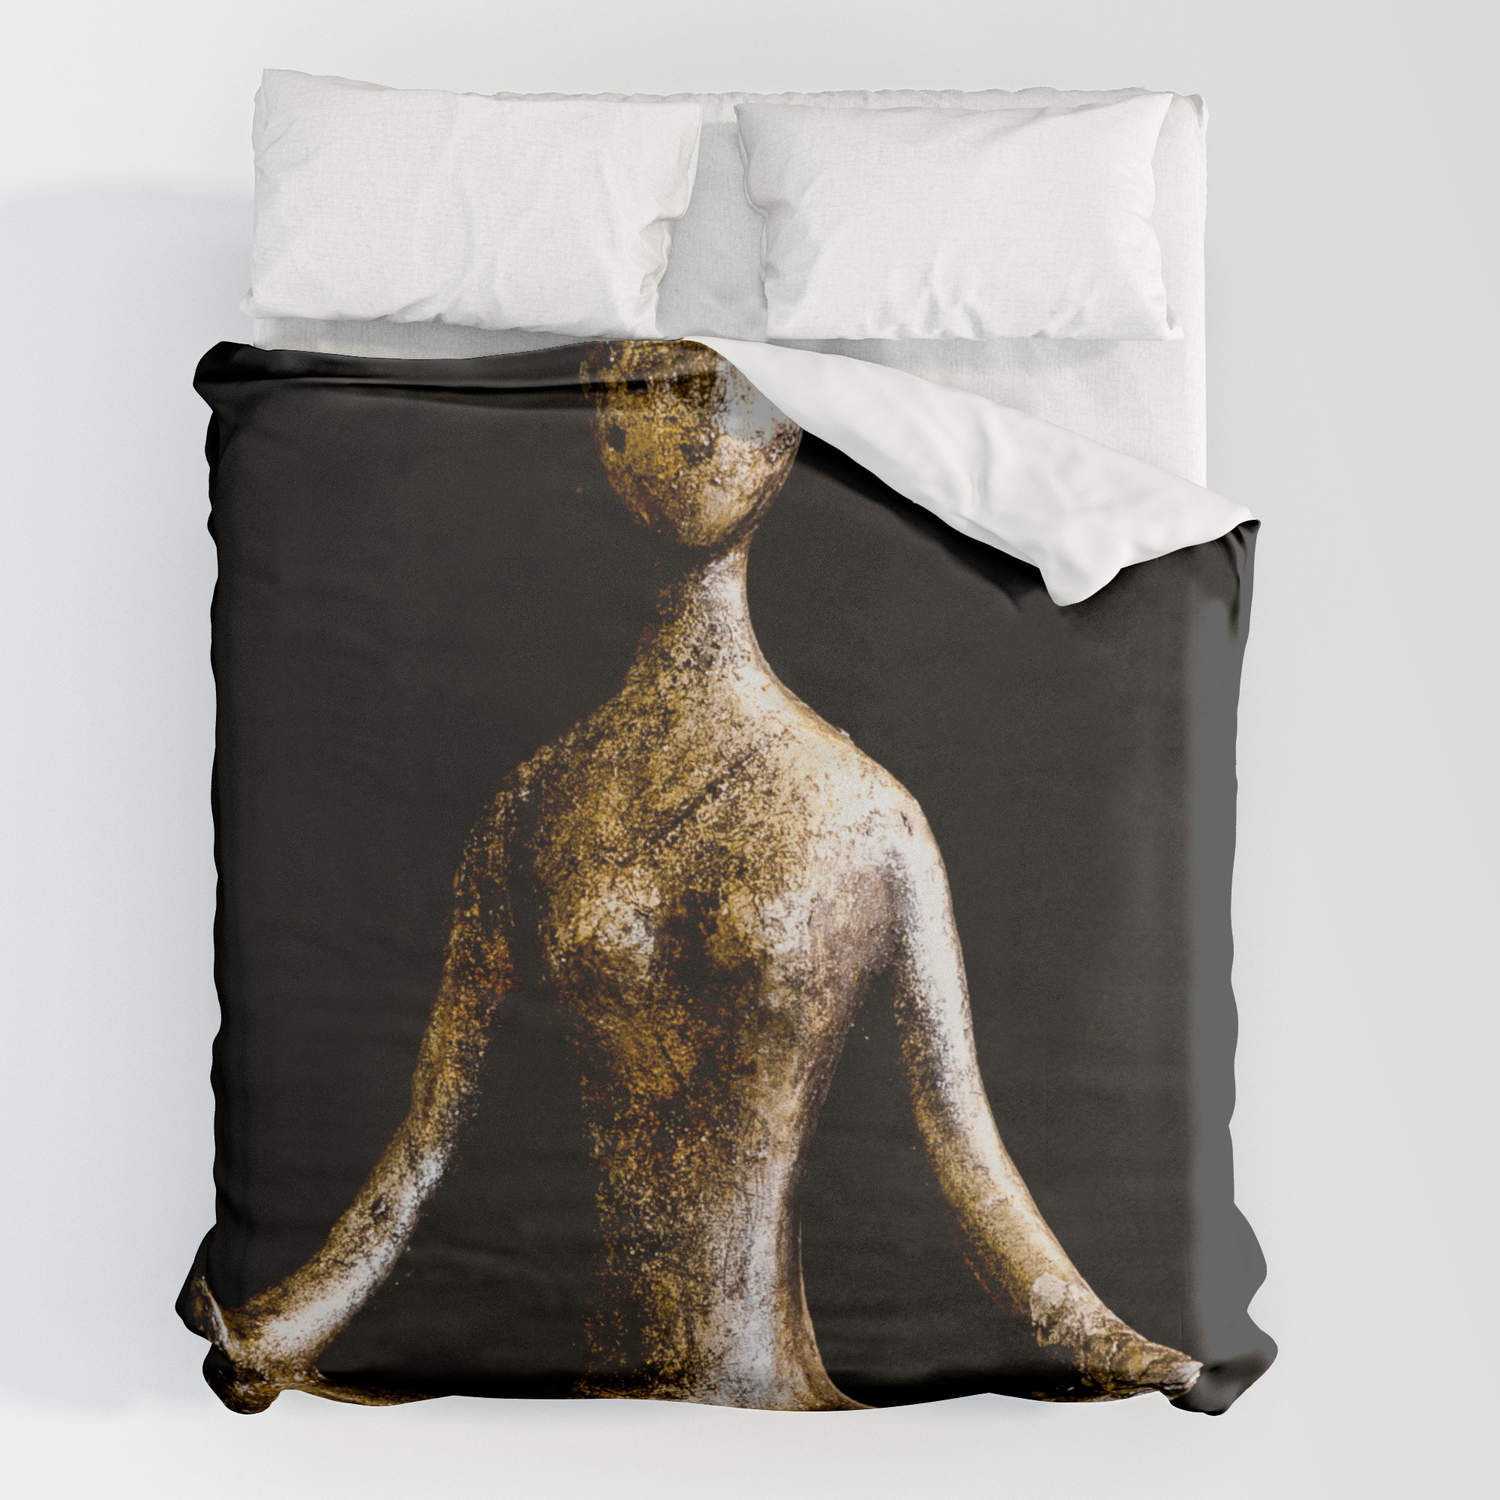 Lotus Position Duvet Cover, Gold And Silver Duvet Cover